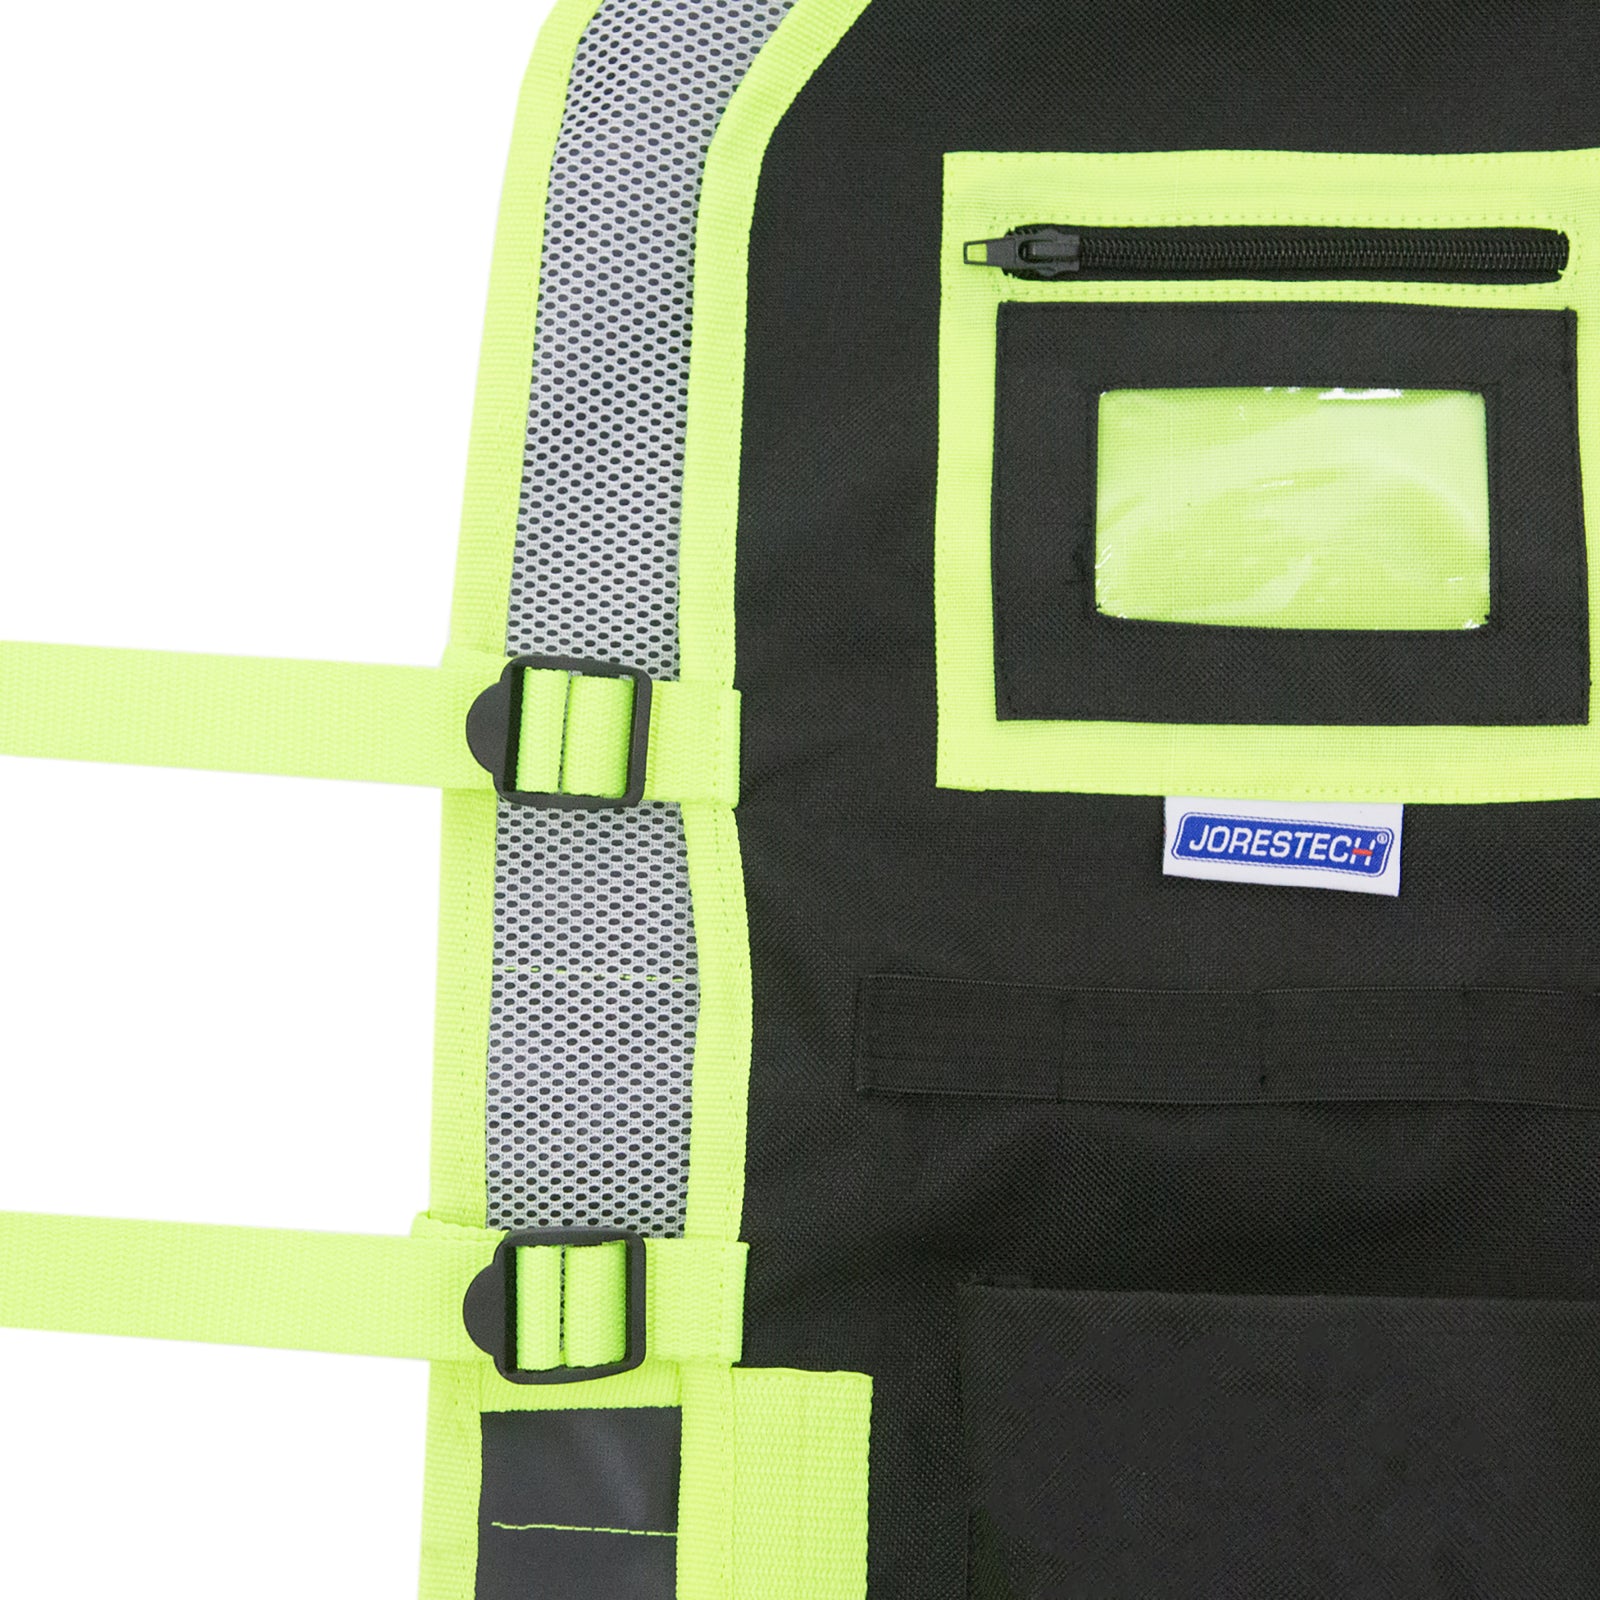 2 adjustable straps located on one sides of the high visibility JORESTECH tool vest for size adjustments